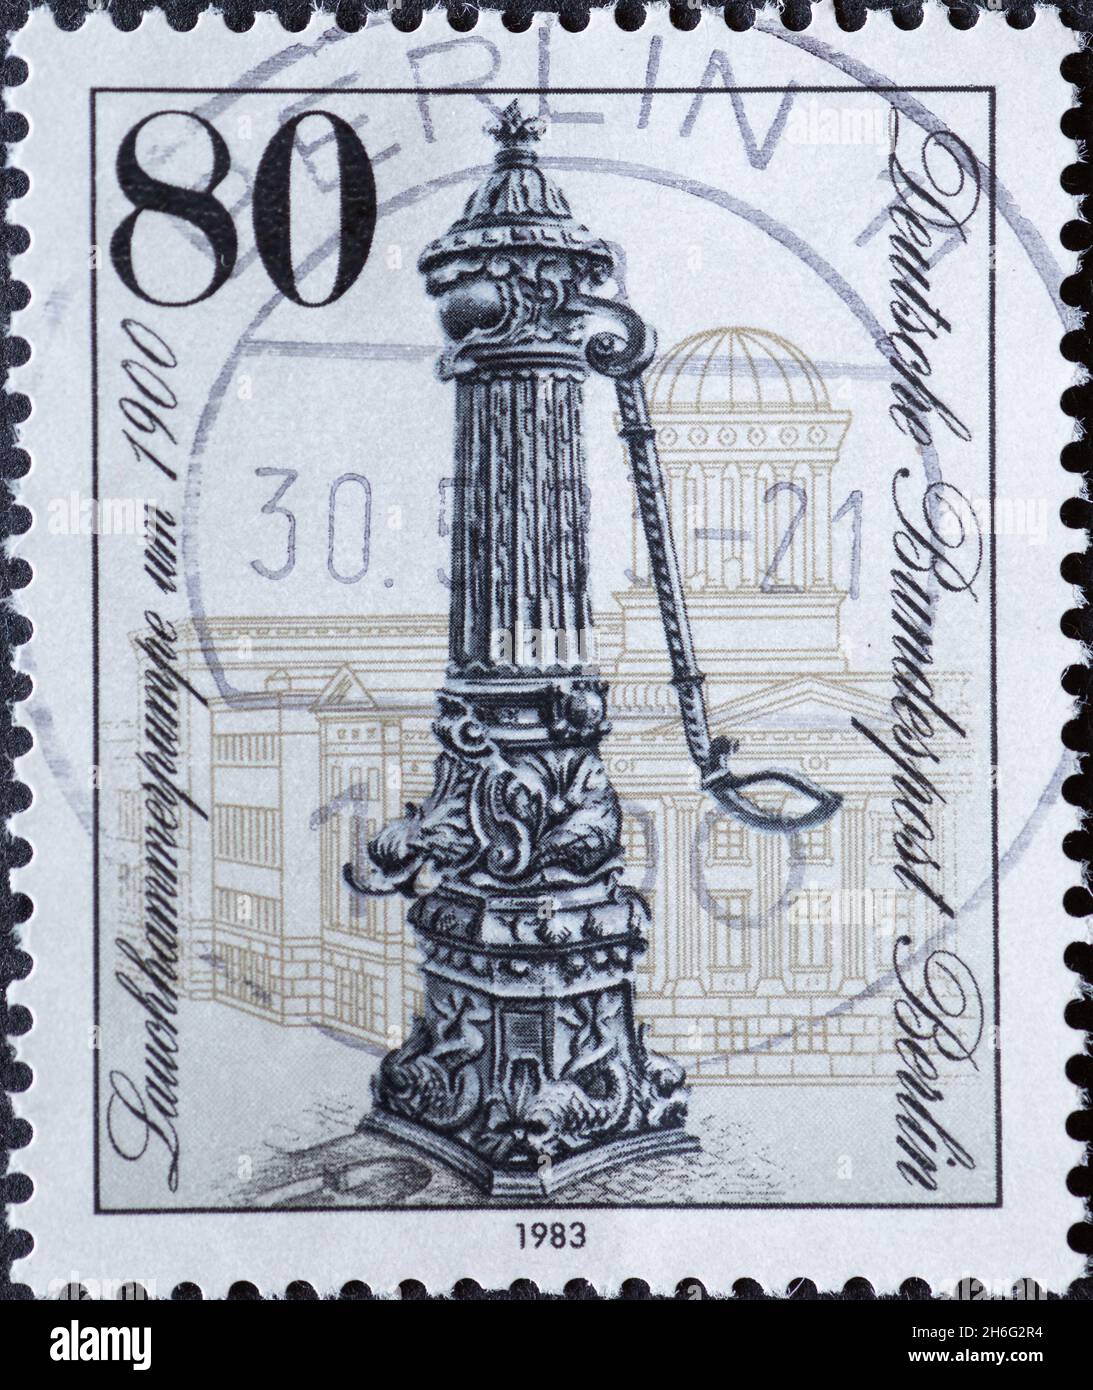 GERMANY, Berlin - CIRCA 1983: a postage stamp from Germany, Berlin showing historic street pumps in Berlin around 1900: Lauch hammer pump, Castle stre Stock Photo